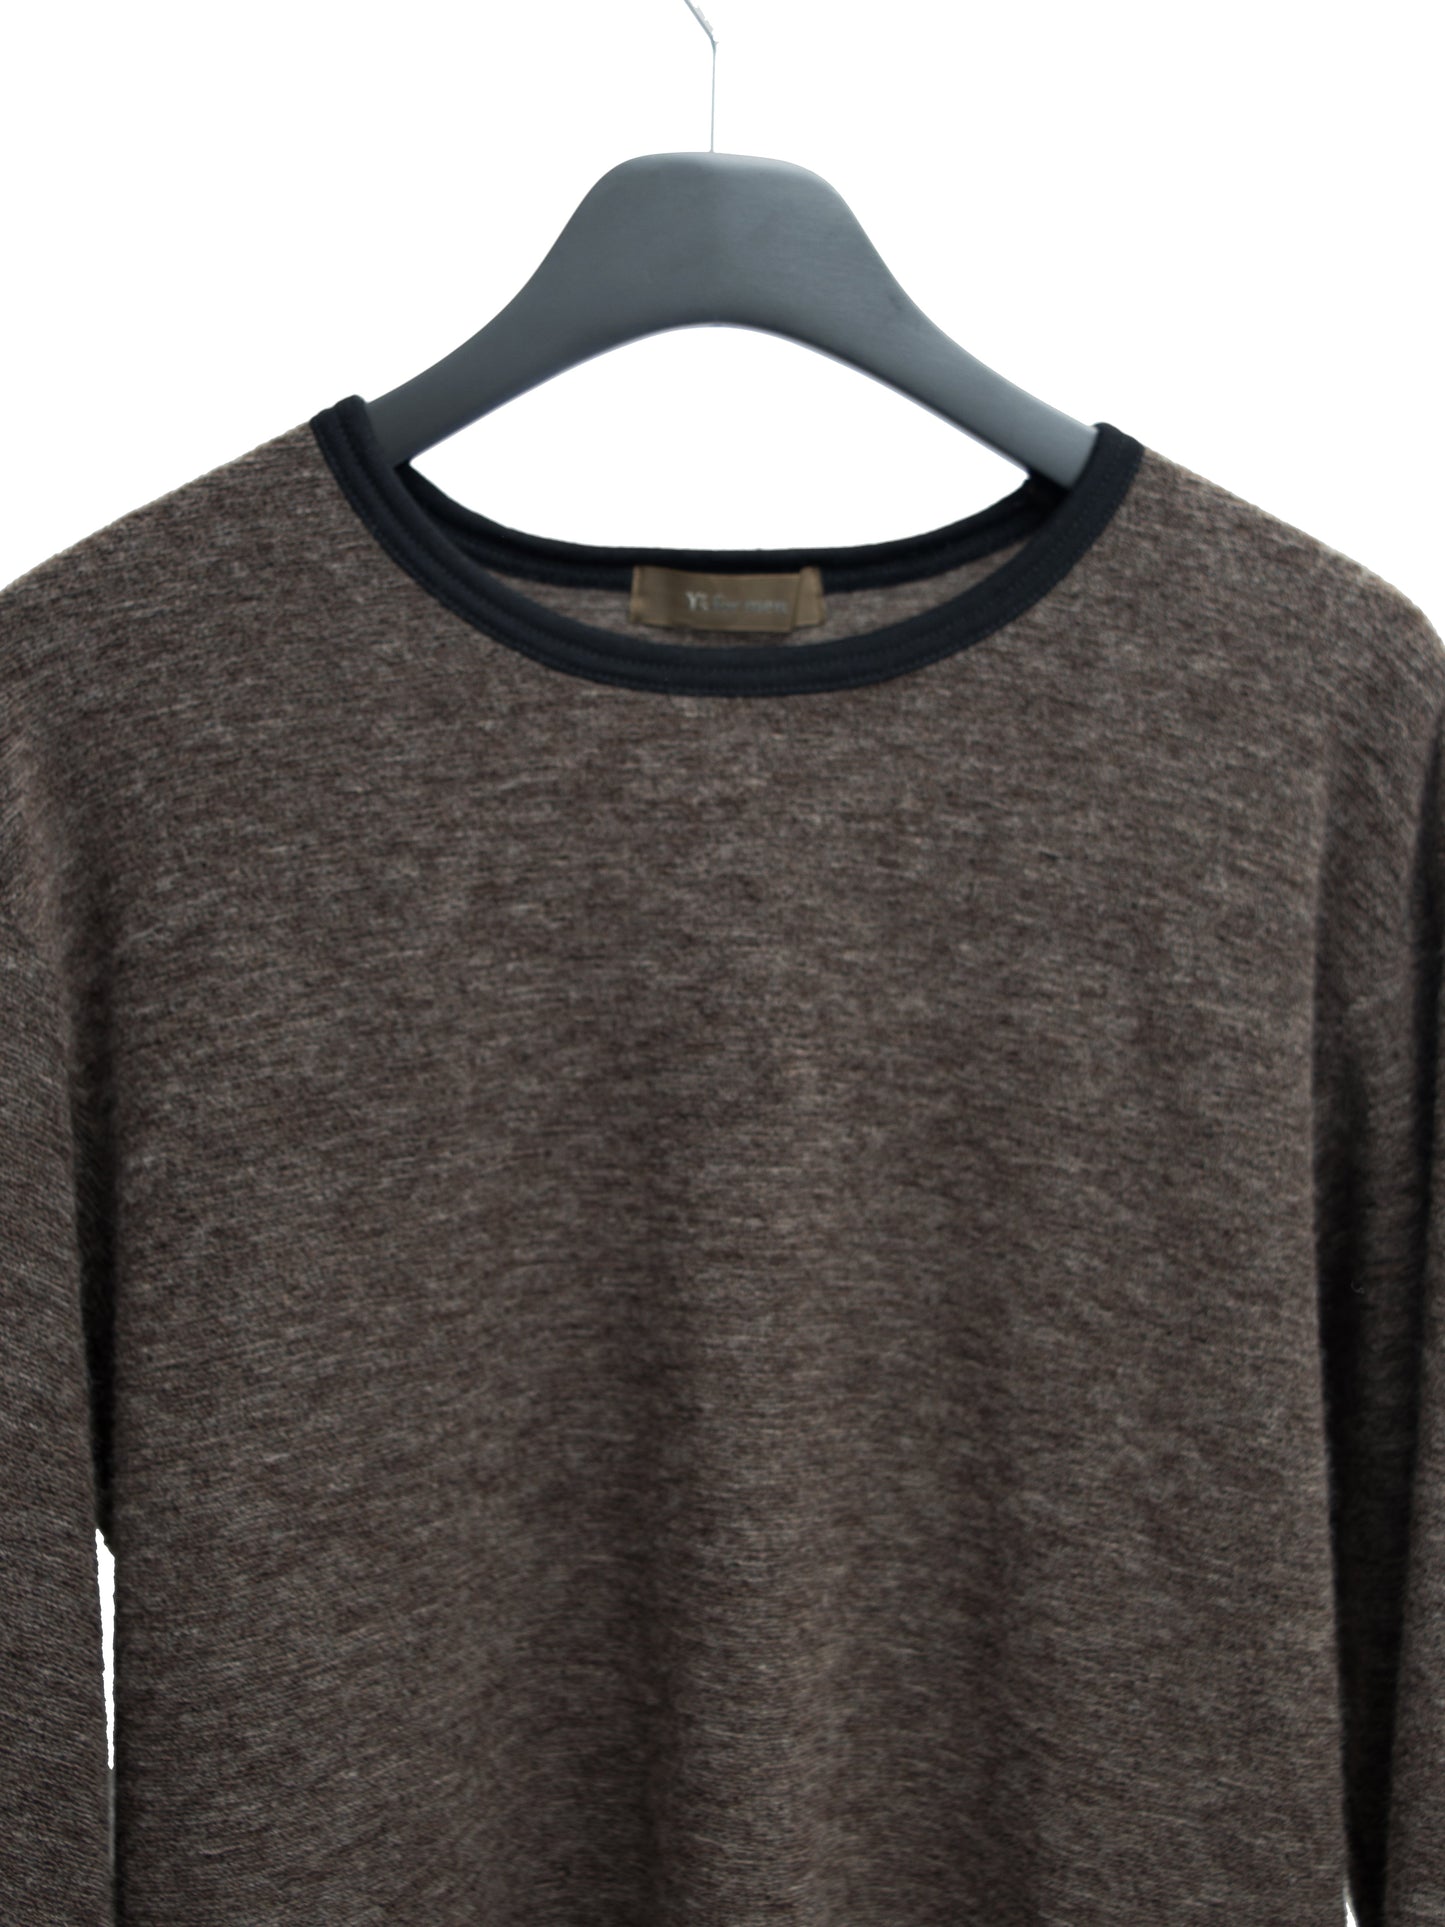 longsleeve top brown ∙ wool poly terry ∙ one size